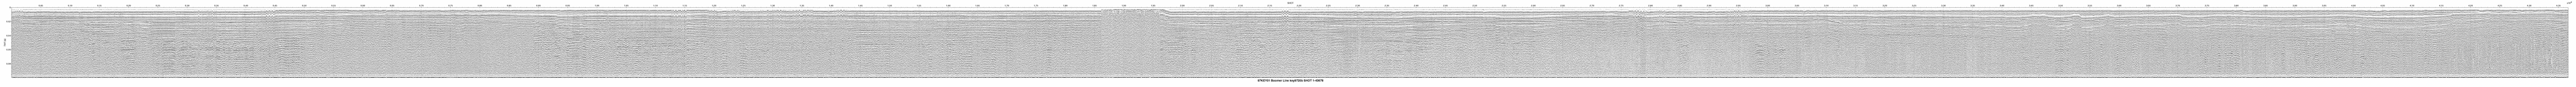 Thumbnail GIF image of the seismic trackline key9720b, with a hotlink to the more detailed, larger JPG image.